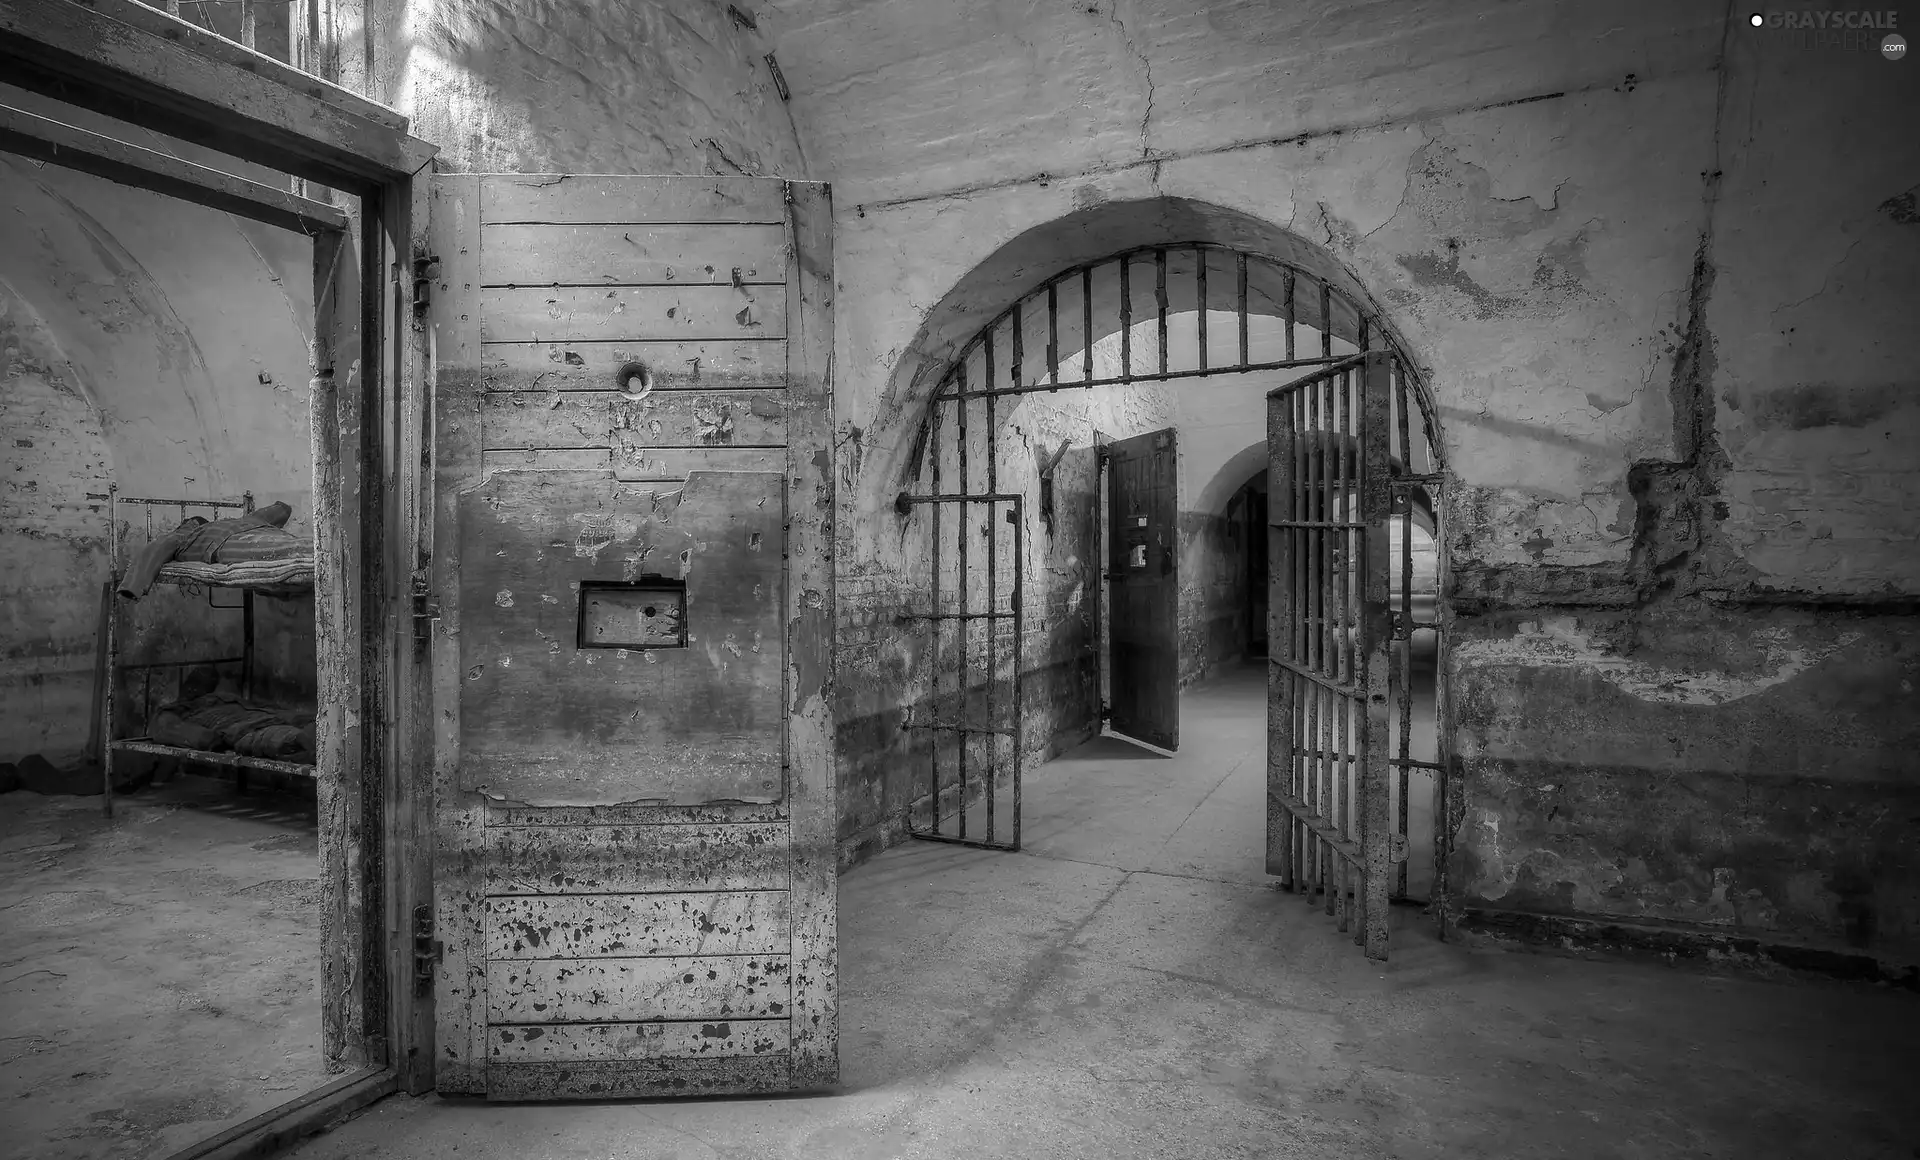 bars, Doors, prison, cell, Neglected